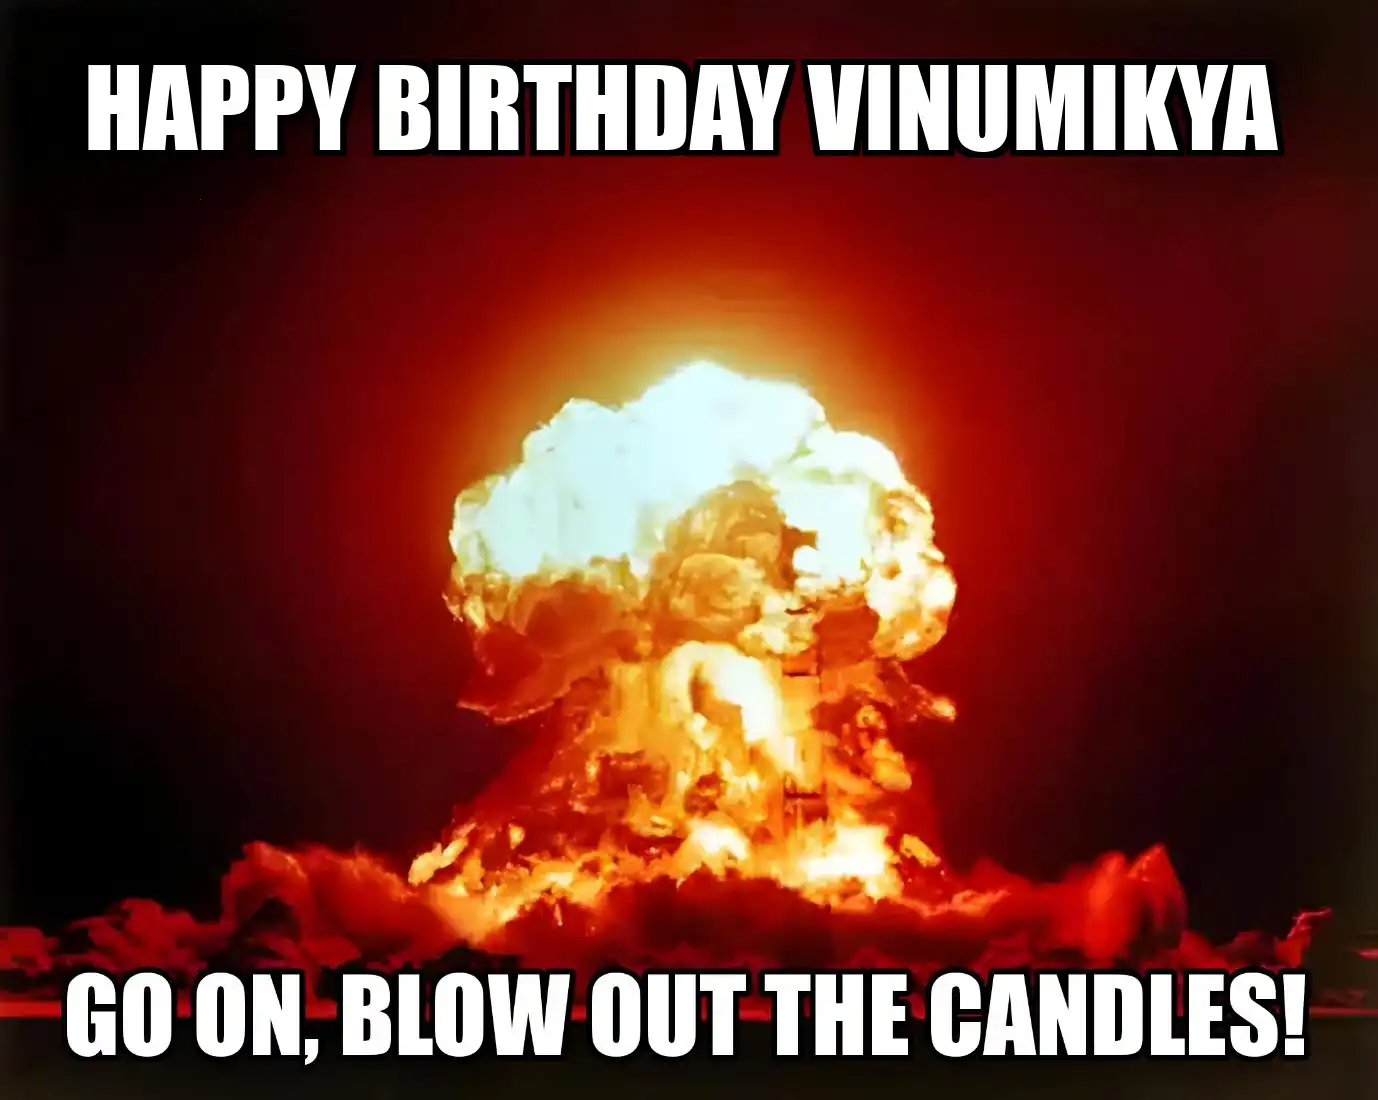 Happy Birthday Vinumikya Go On Blow Out The Candles Meme